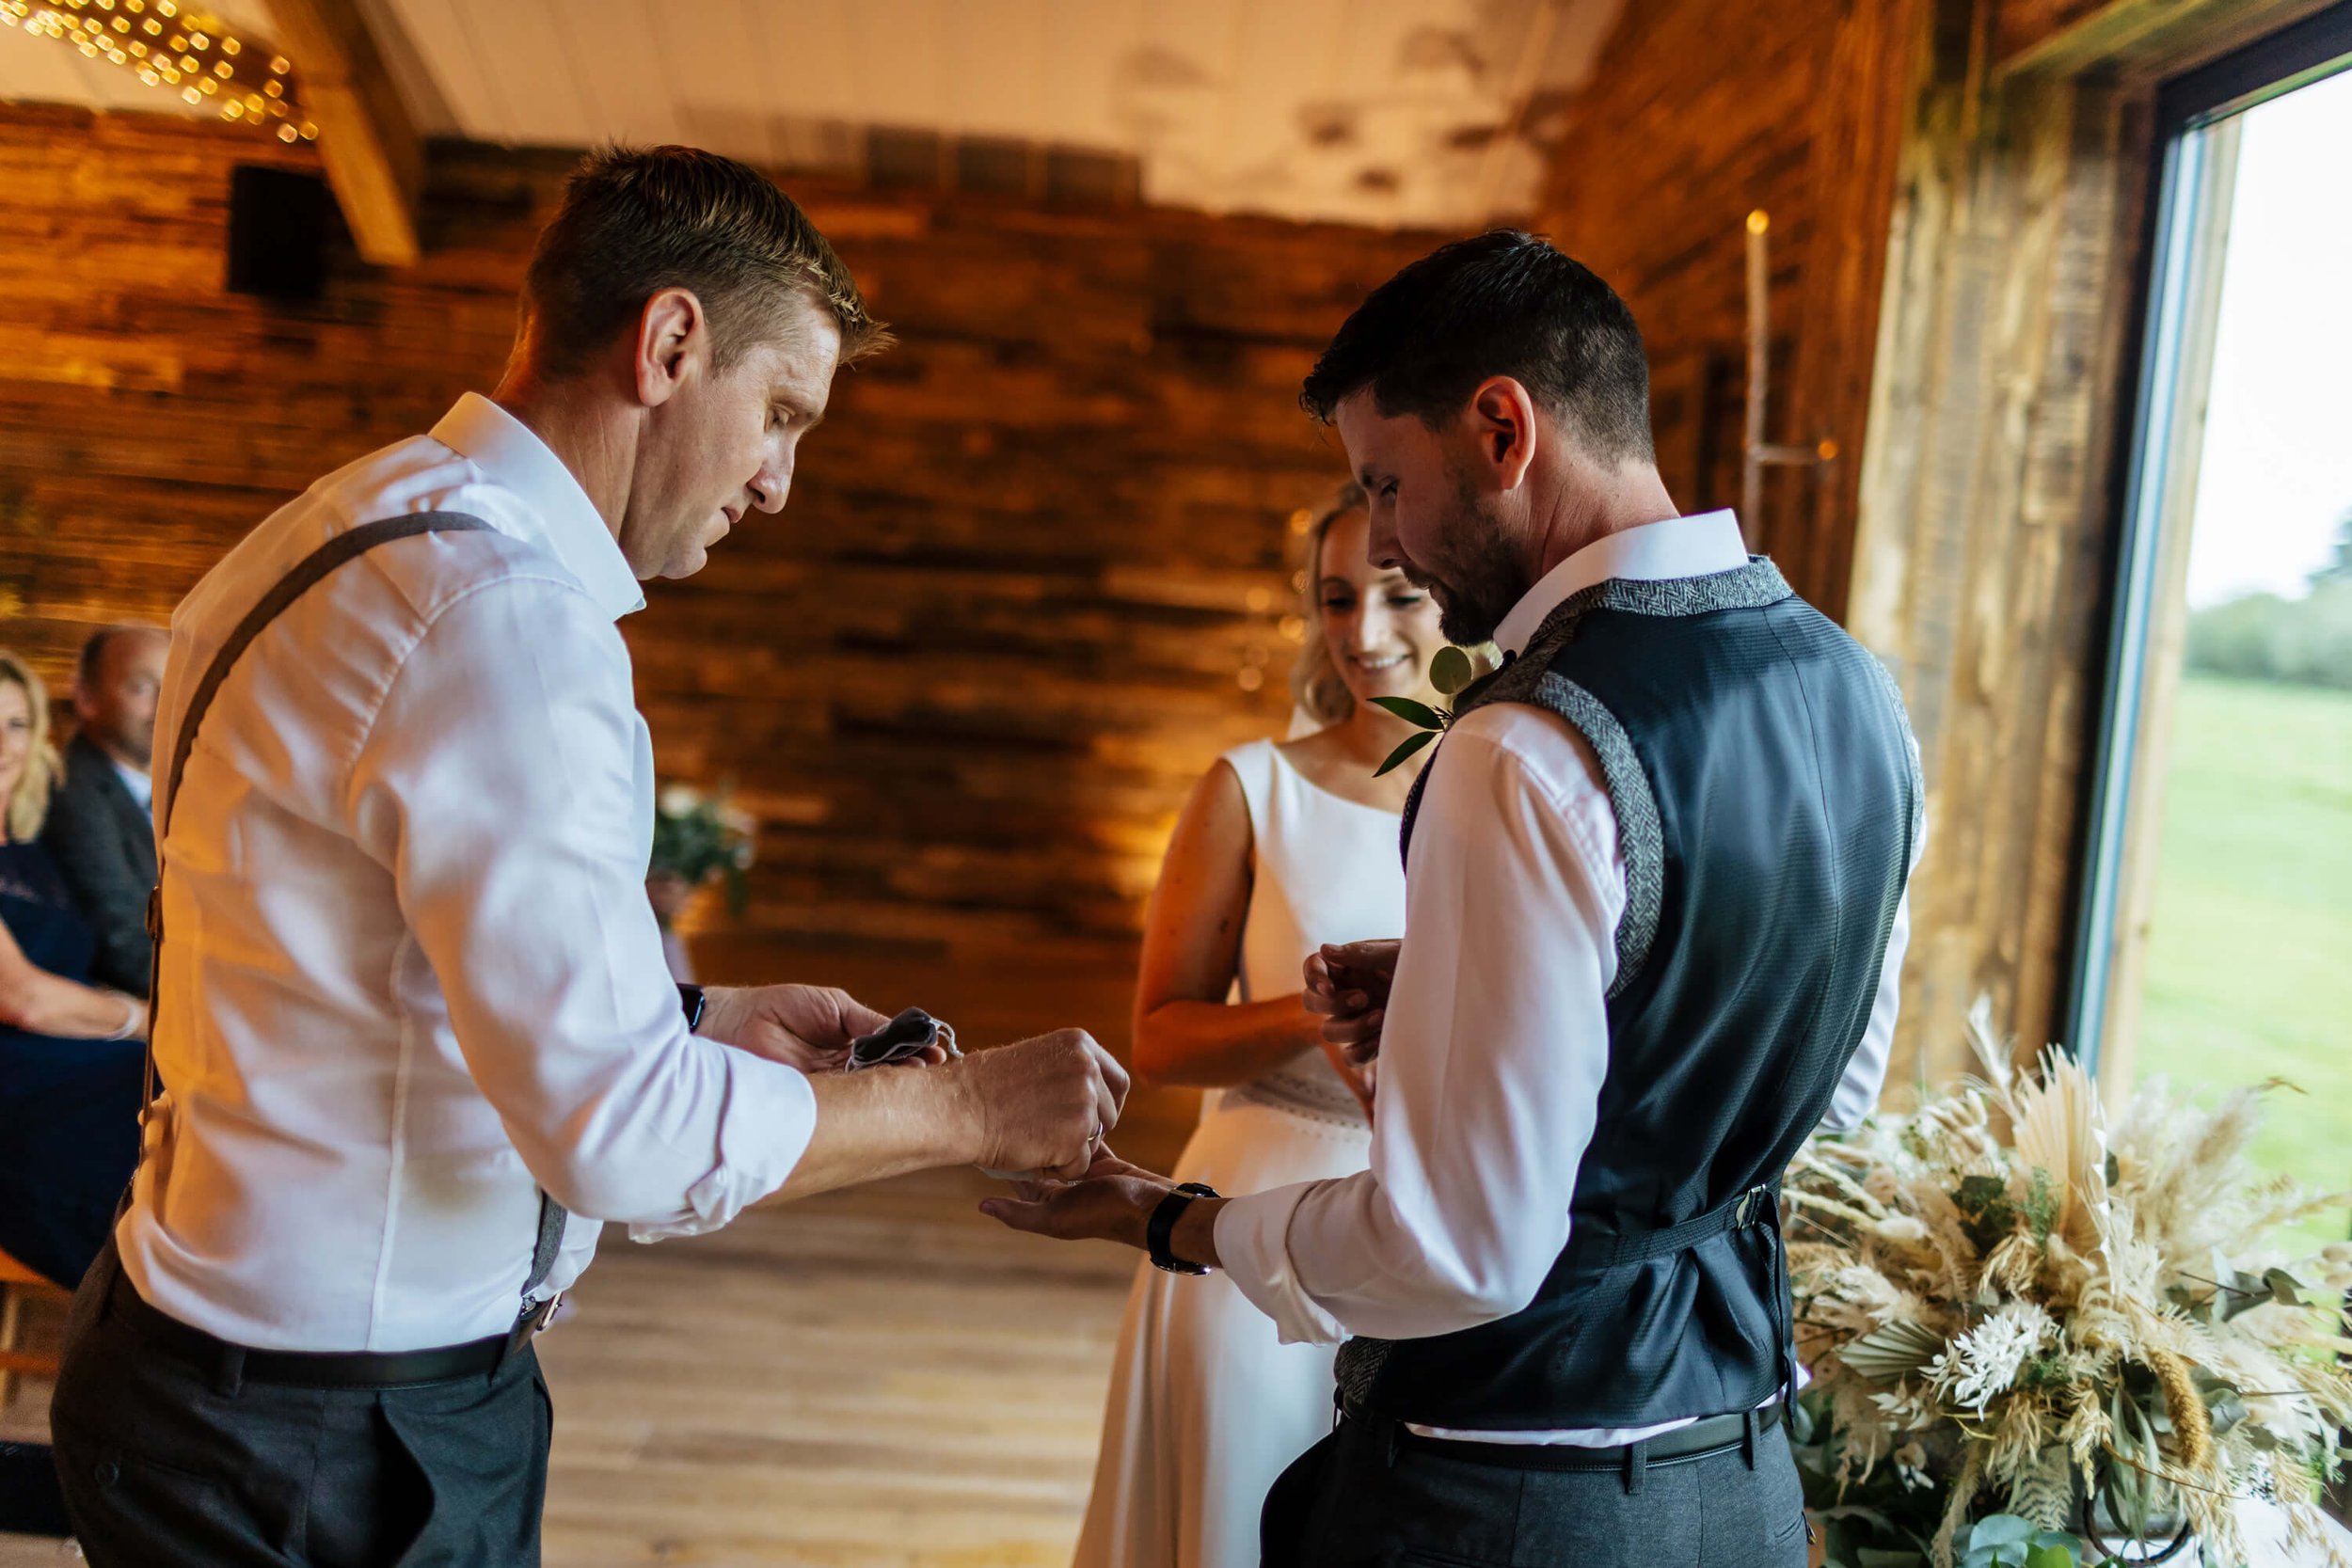 Best man passes the rings to the groom at the wedding ceremony